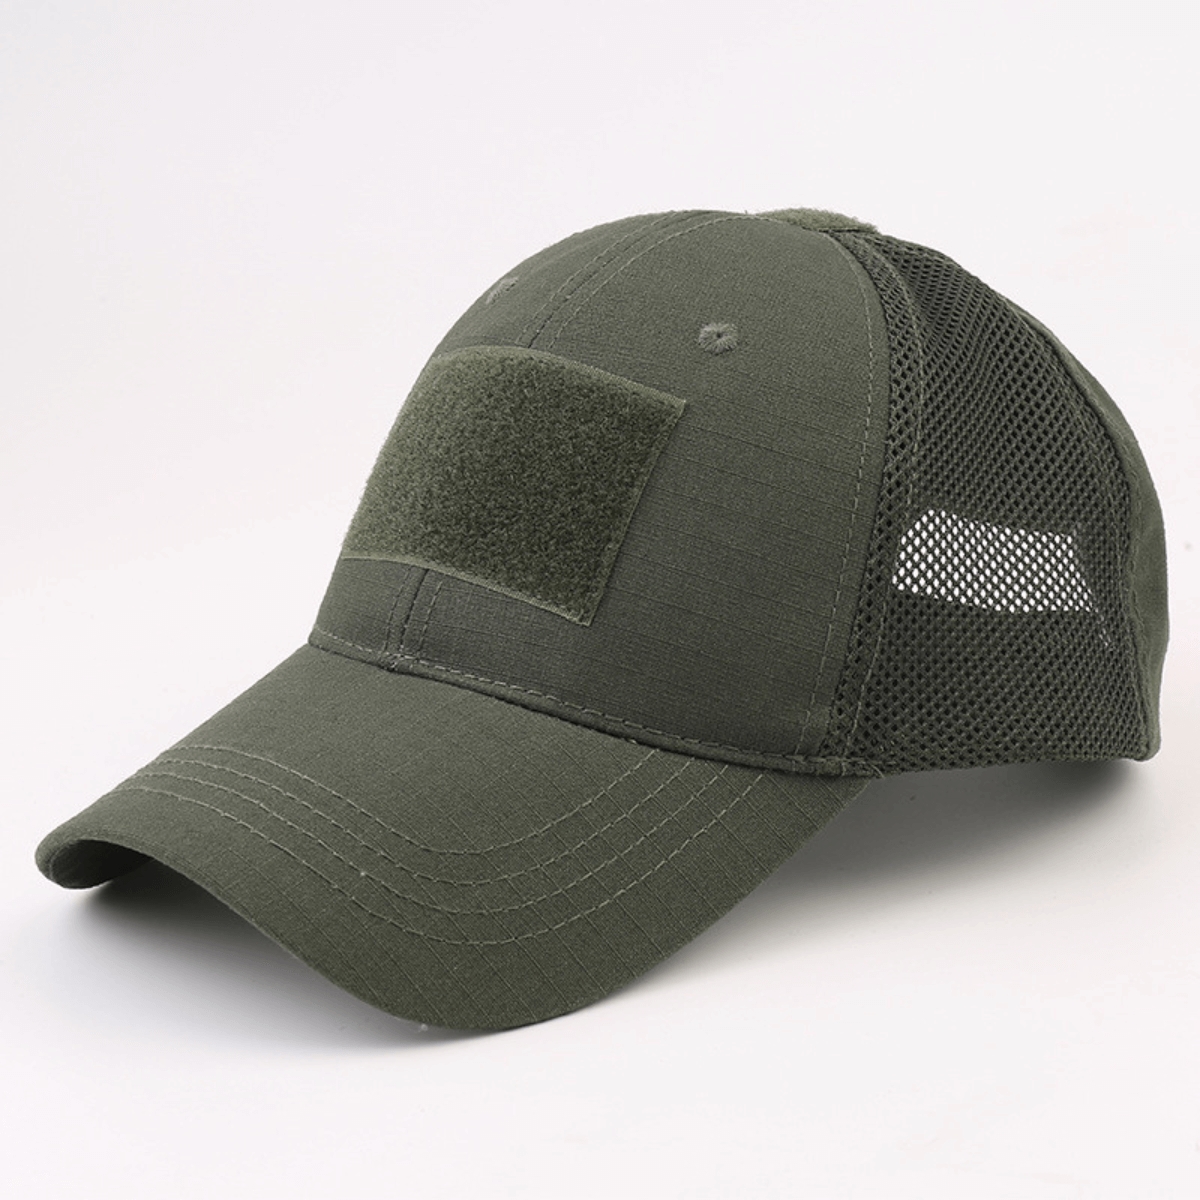 Picture of JupiterGear JG-HAT2-GRN Military-Style Tactical Patch Hat with Adjustable Strap (JG-HAT2) Green